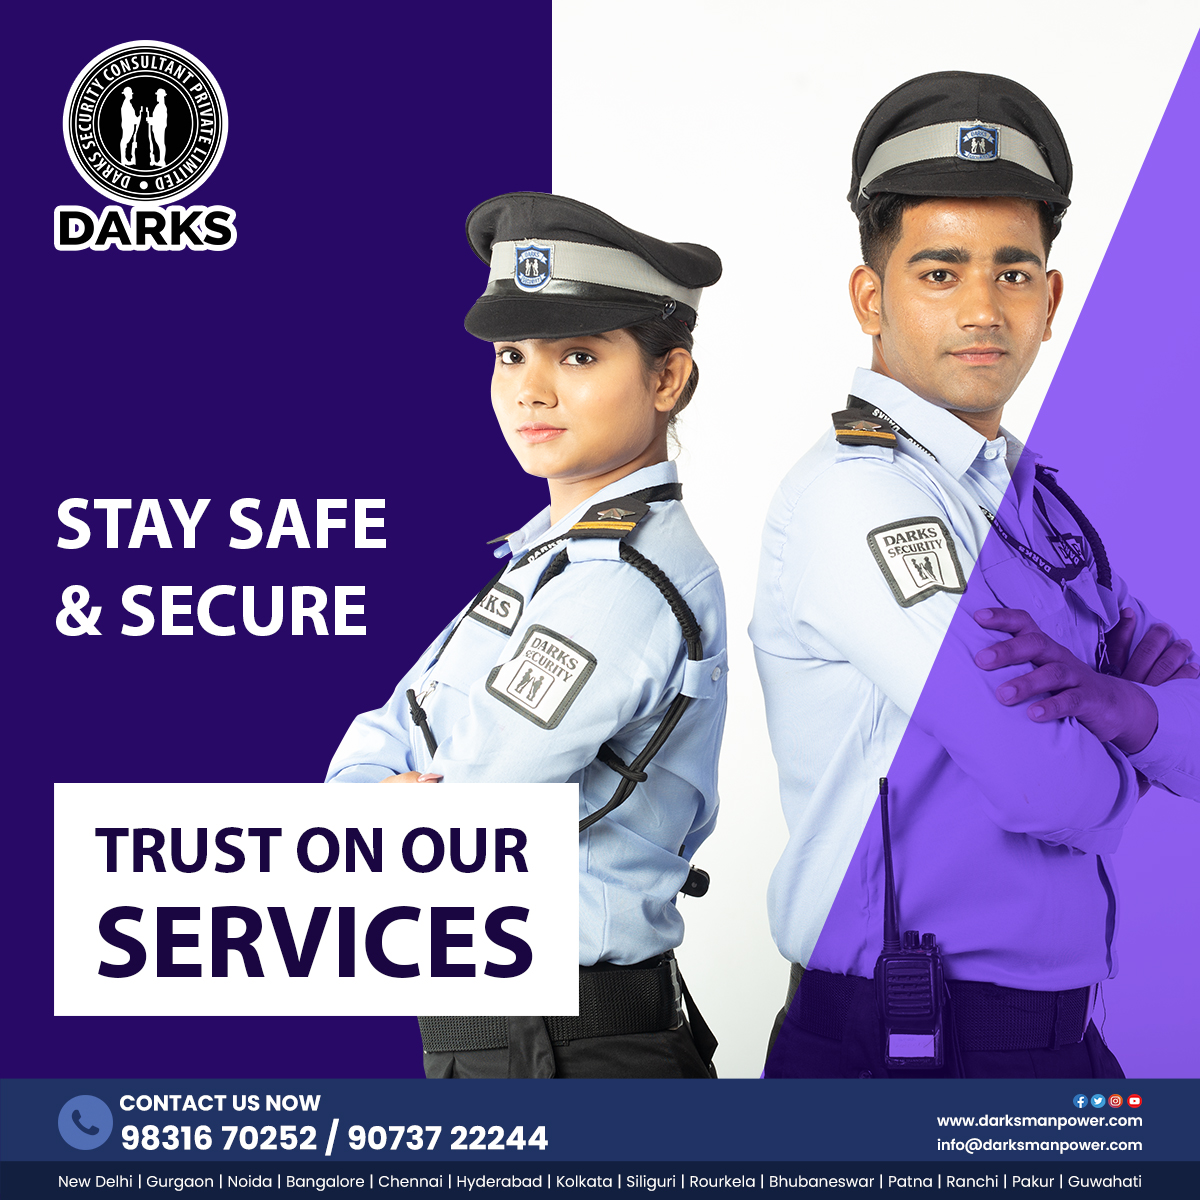 Trust Darks Manpower for unwavering security solutions that safeguard your peace of mind.

Call us now:
📞Call: +91 98316 70251
📧Mail: darks_hm@darks.in

#securityguards #securitycompany #securityservices #security #darkssecurity #securitysafety #bestsecuritycompanyinkolkata